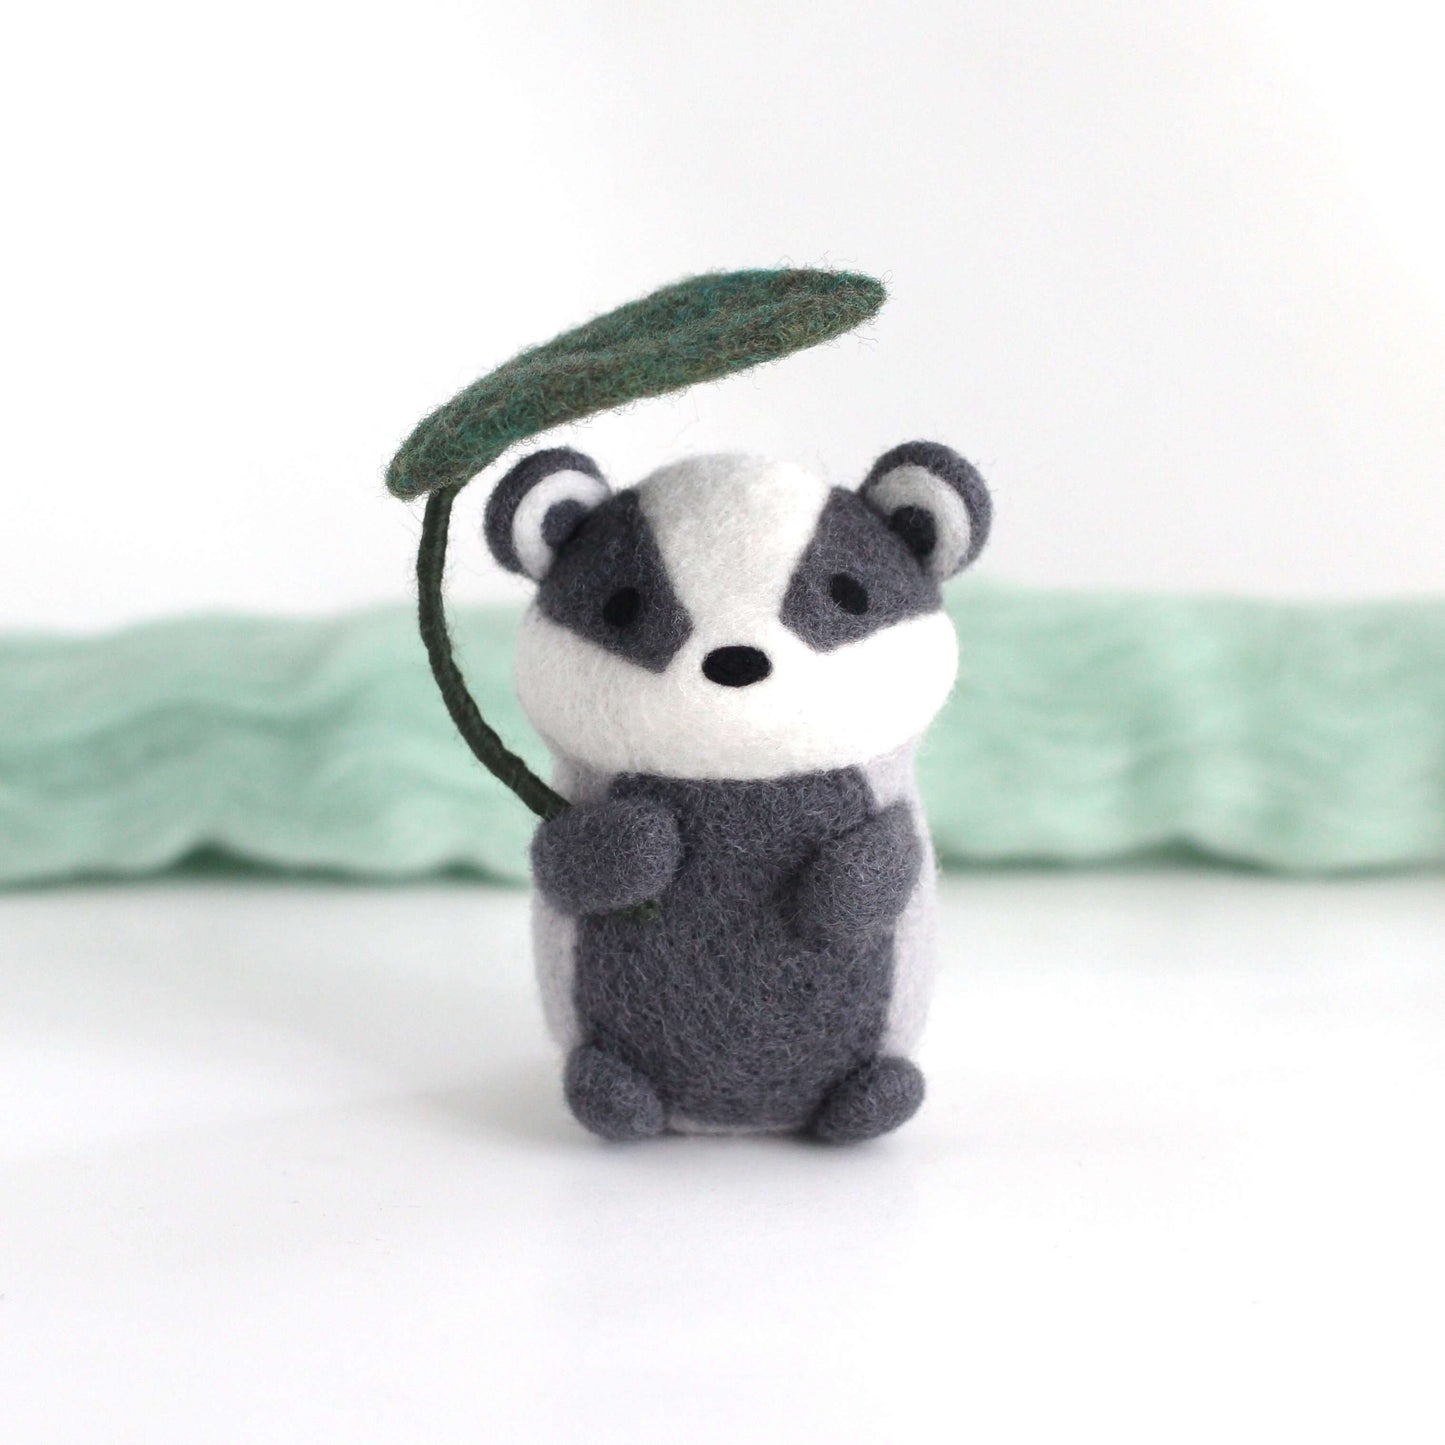 Needle Felted Badger Holding Leaf Umbrella by Wild Whimsy Woolies